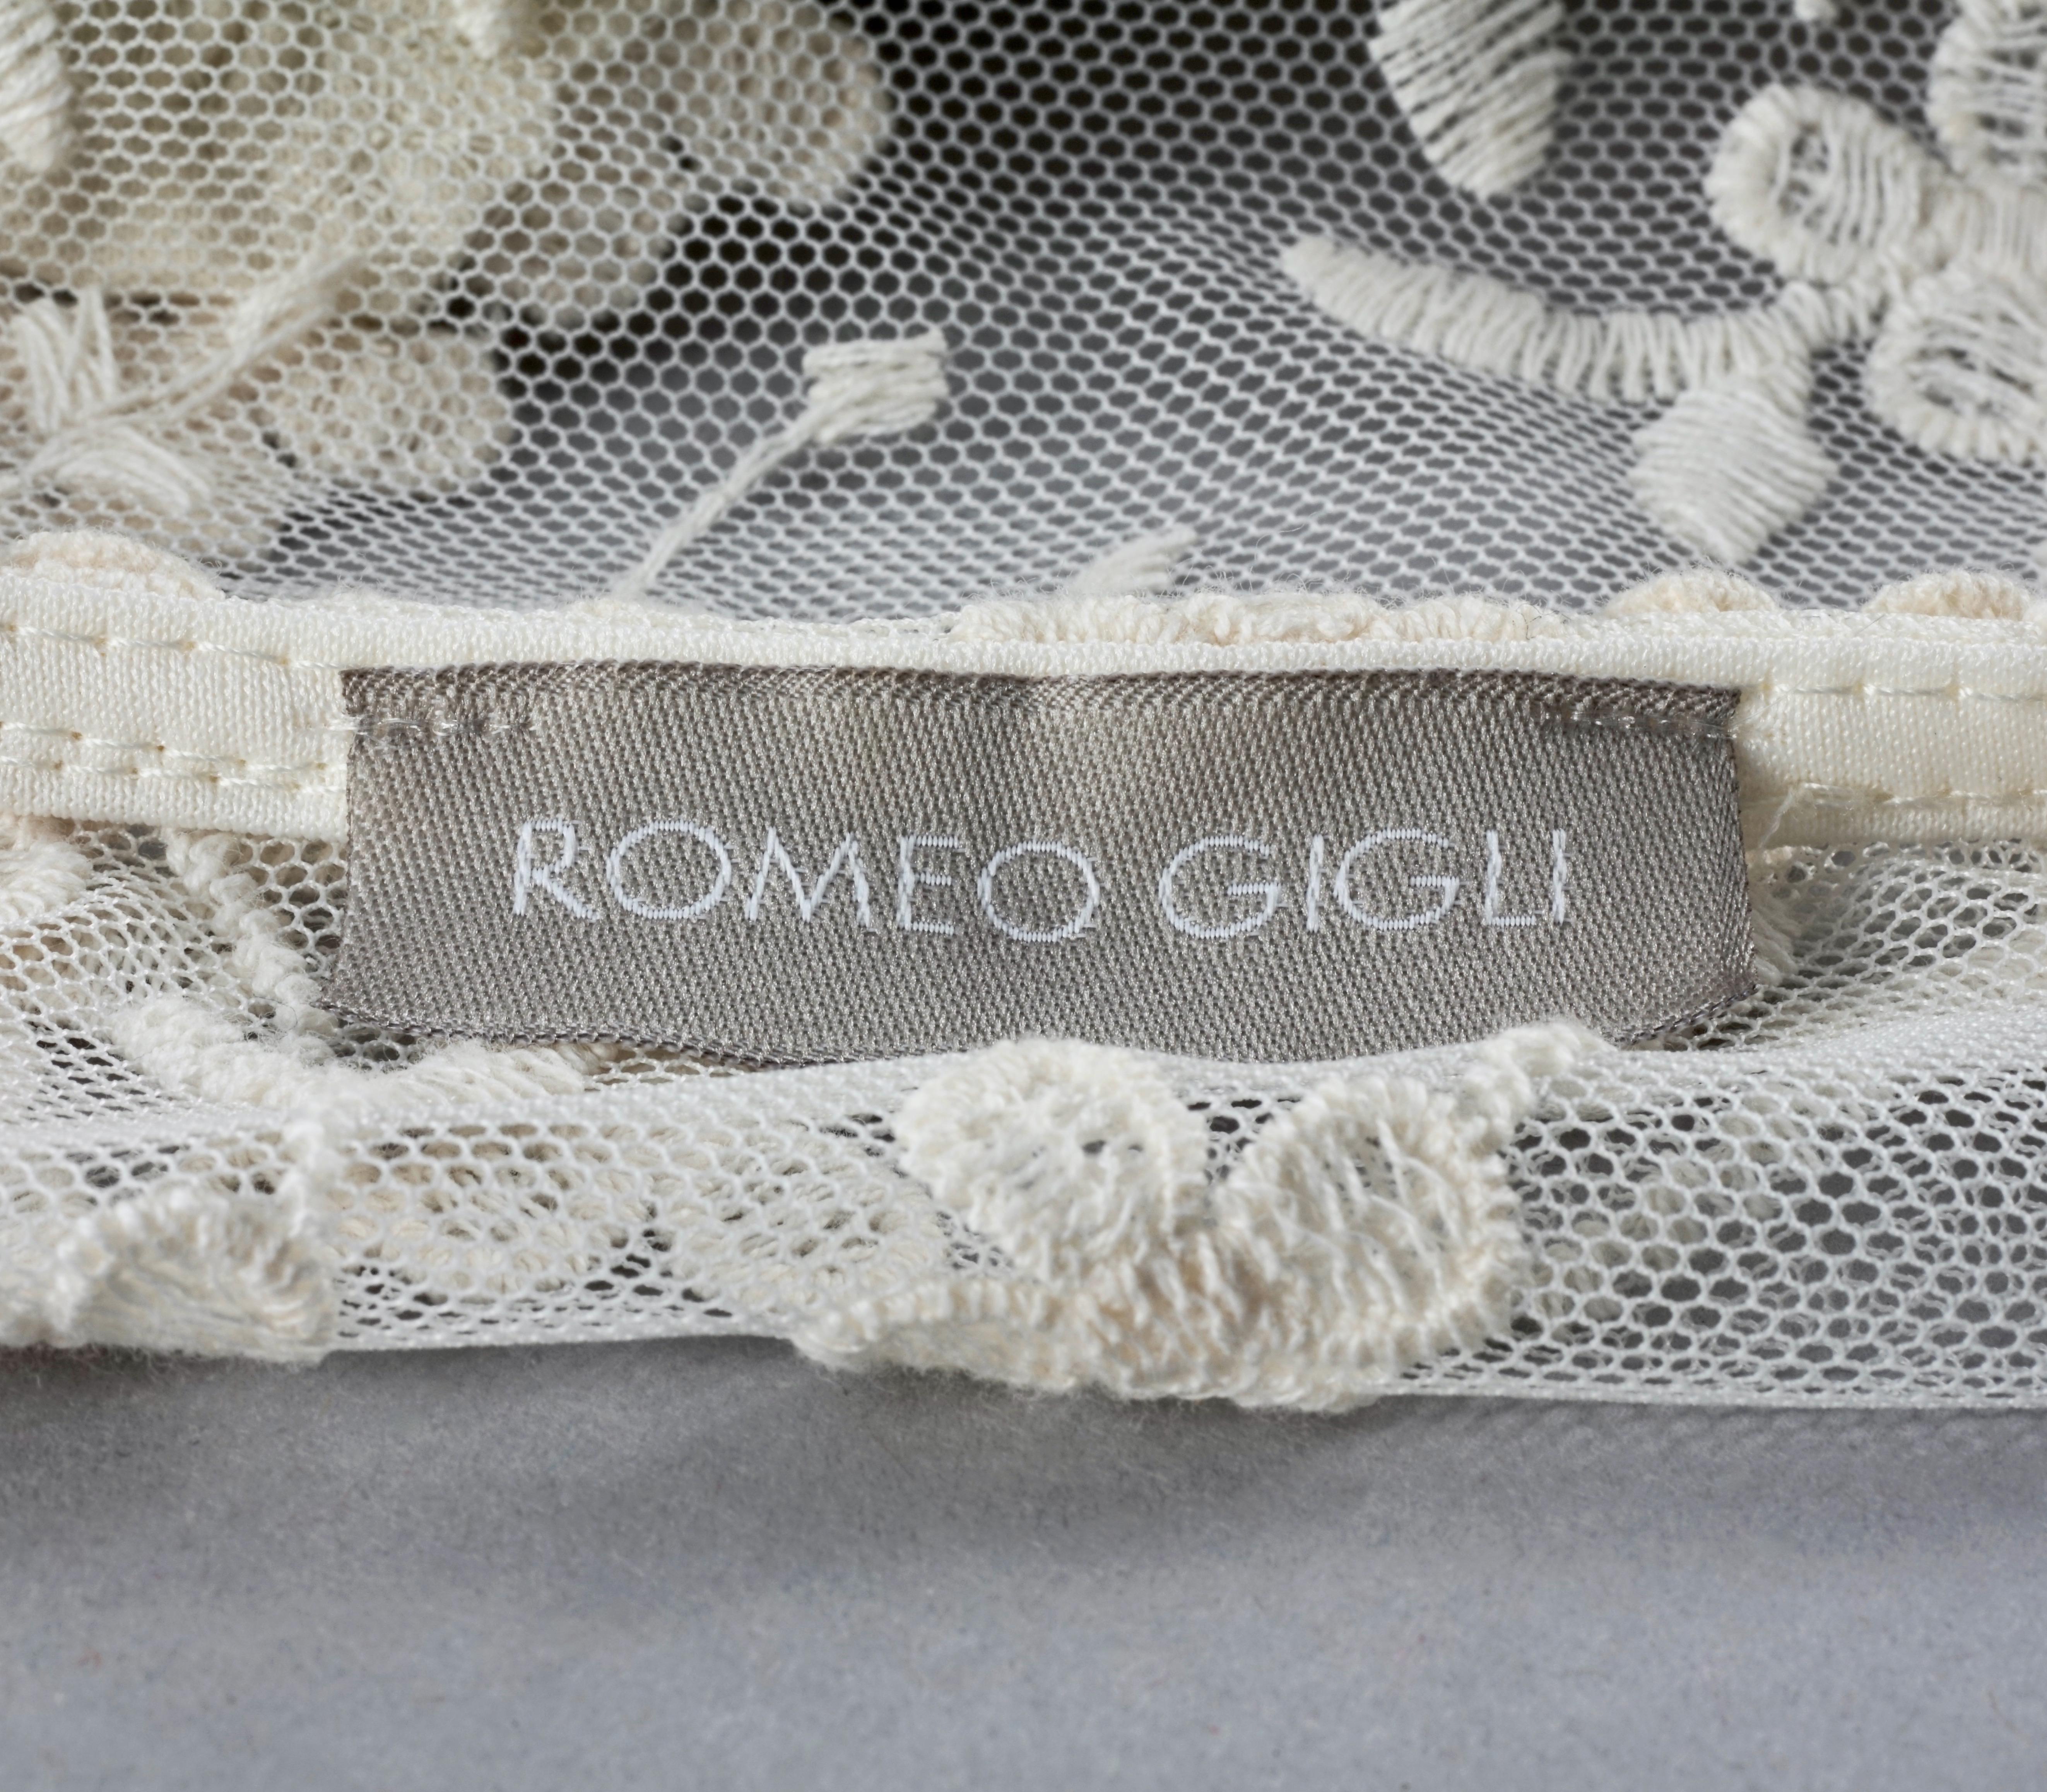 Vintage ROMEO GIGLI Ecru Lace with Wide Belt Long Formal Dress For Sale 2